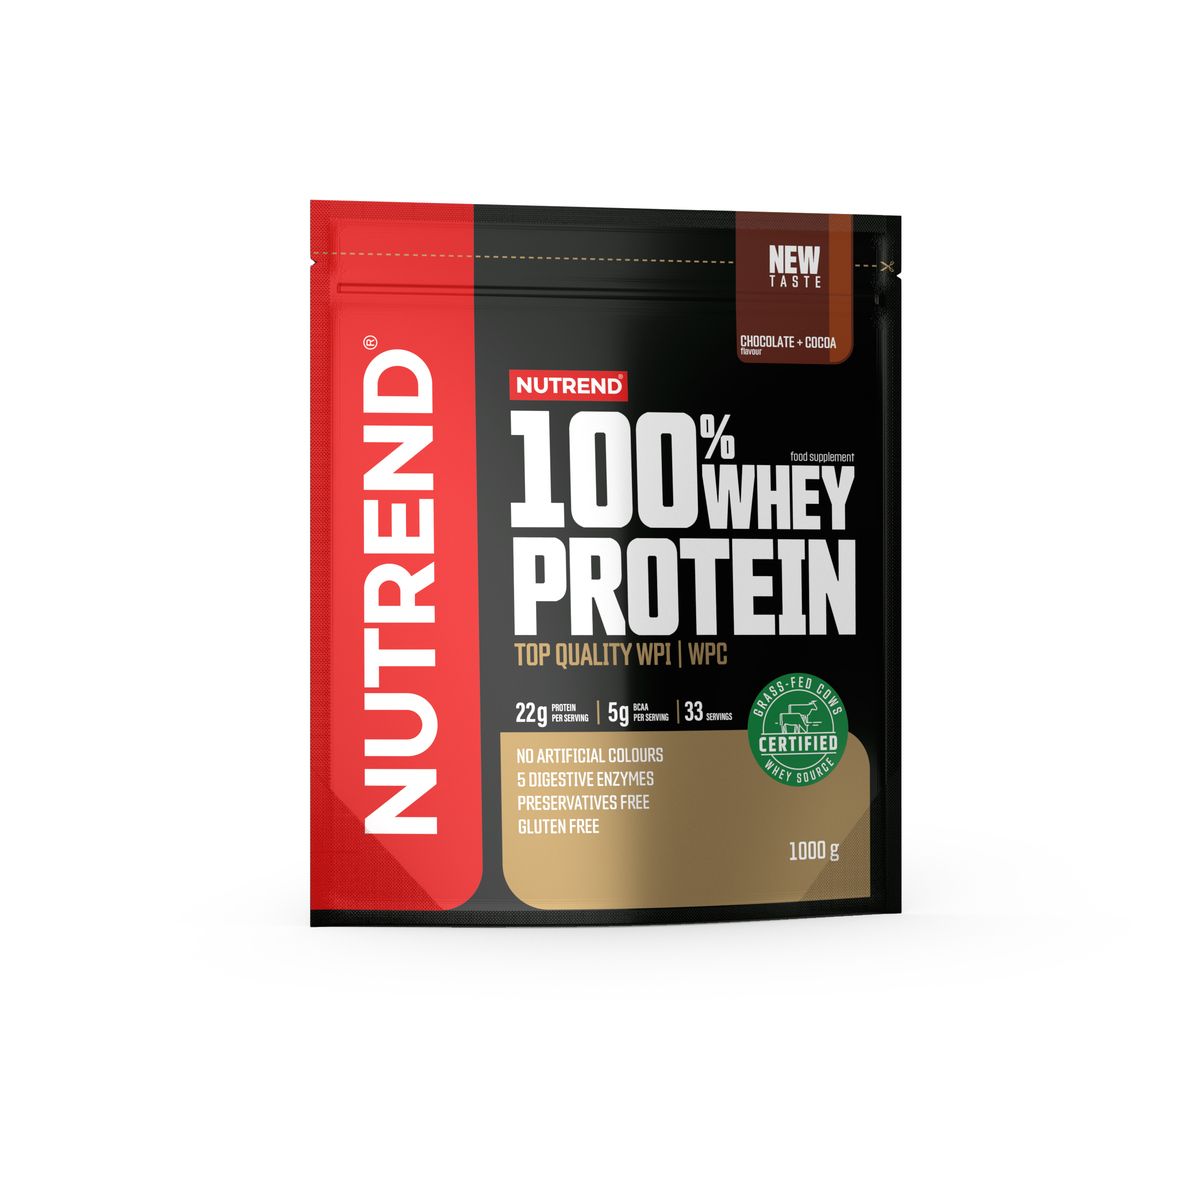 Concentrate Proteice - NUTREND 100% WHEY PROTEIN 1Kg Caramel Latte, advancednutrition.ro